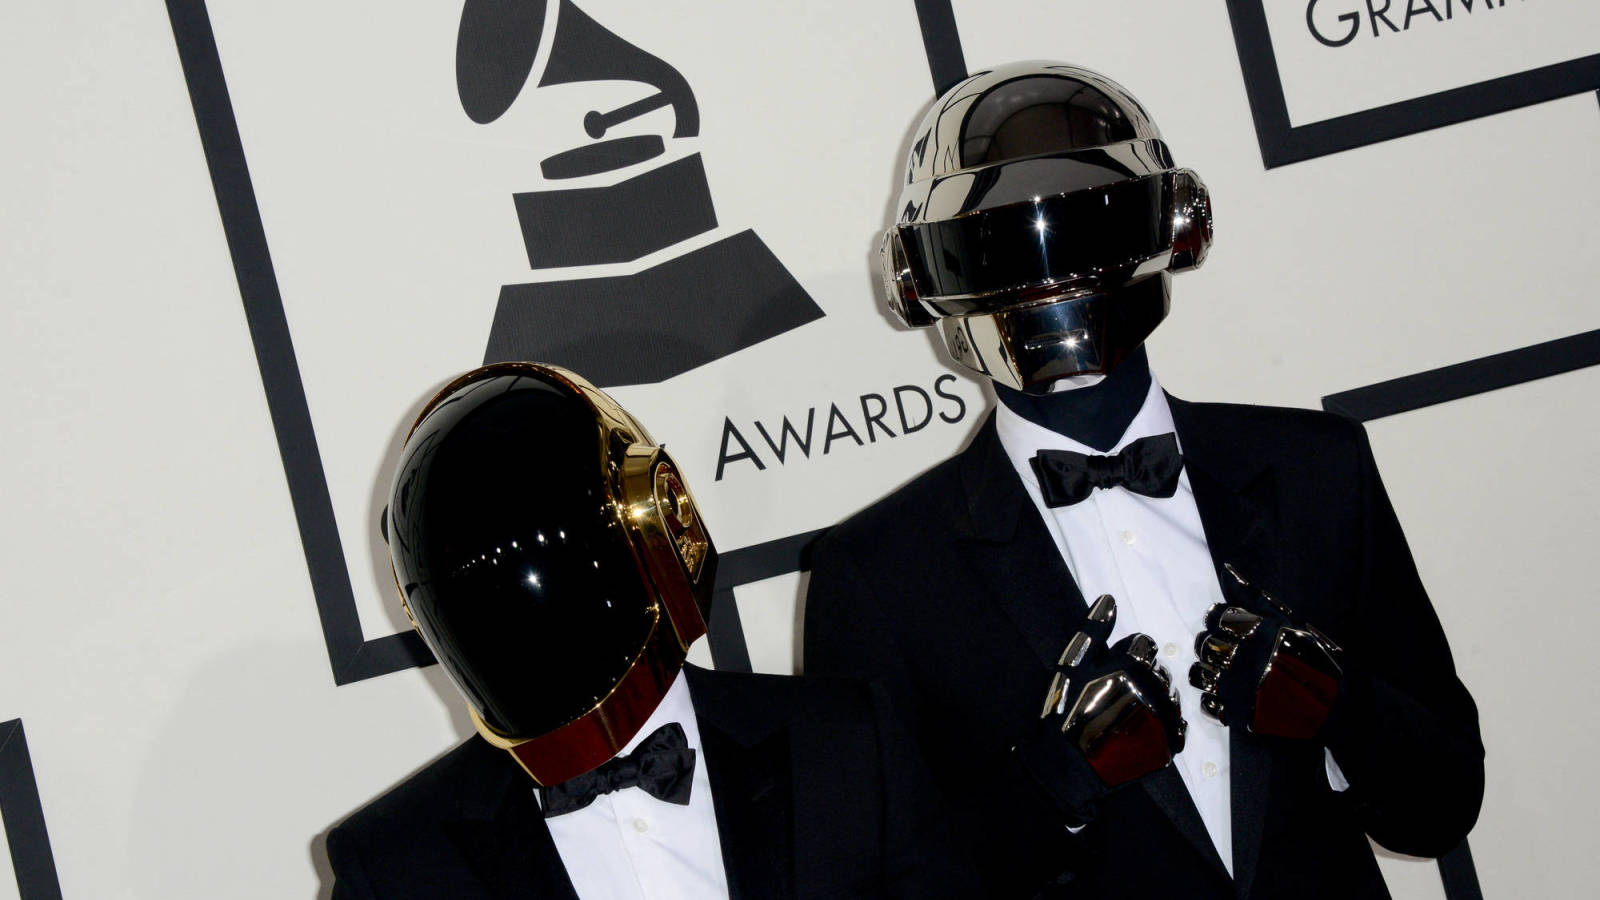 Daft Punk's Retirement Closes the Book on an Era of Electronic Music